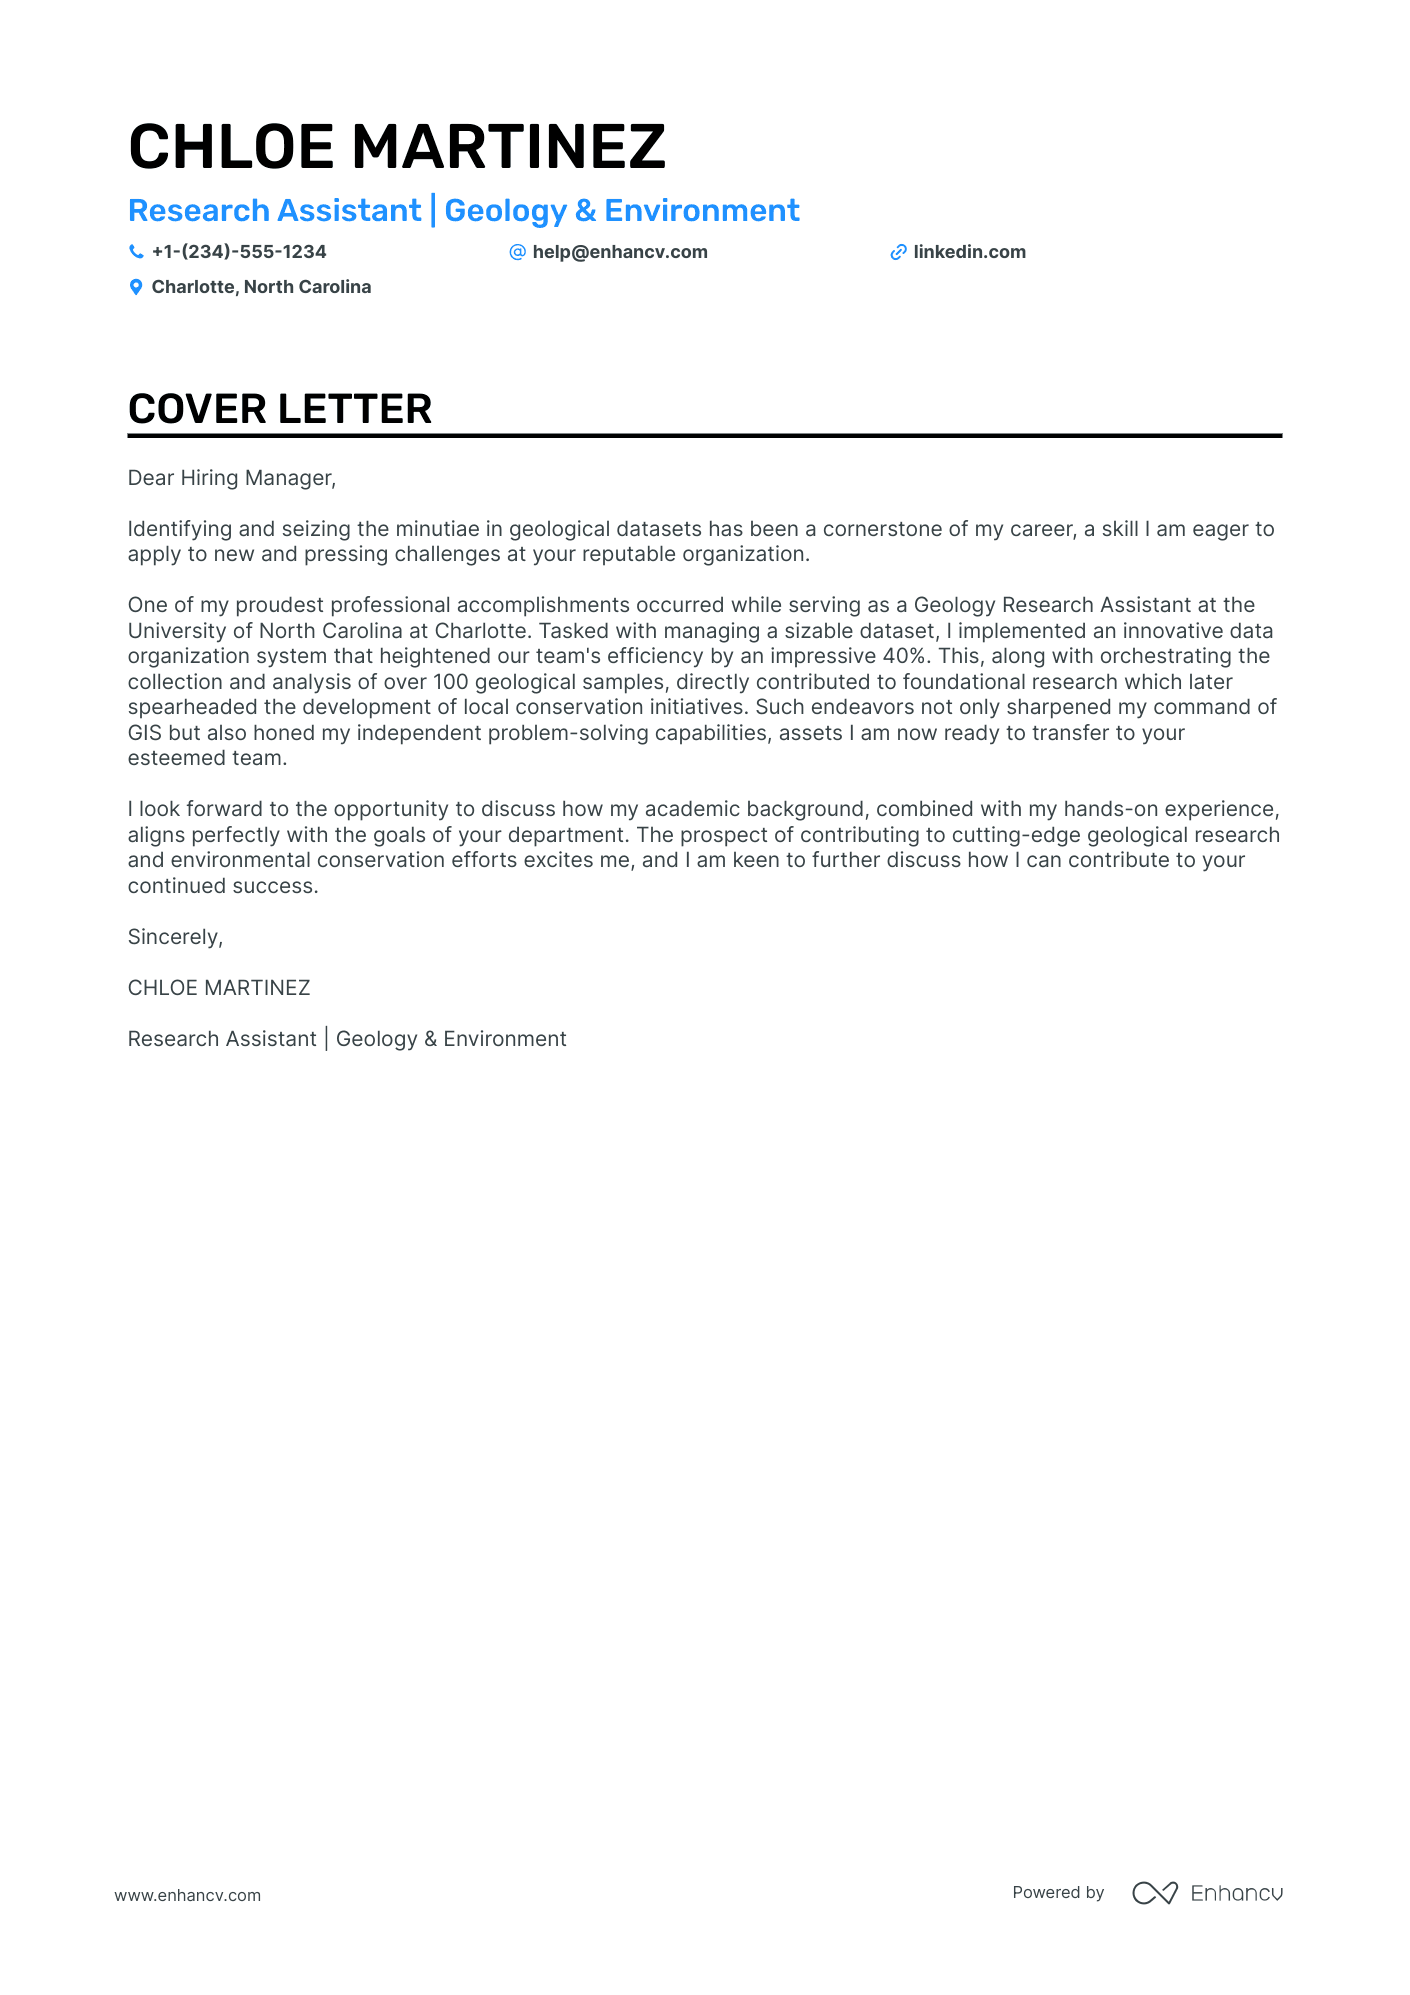 cover letter for job application for research assistant